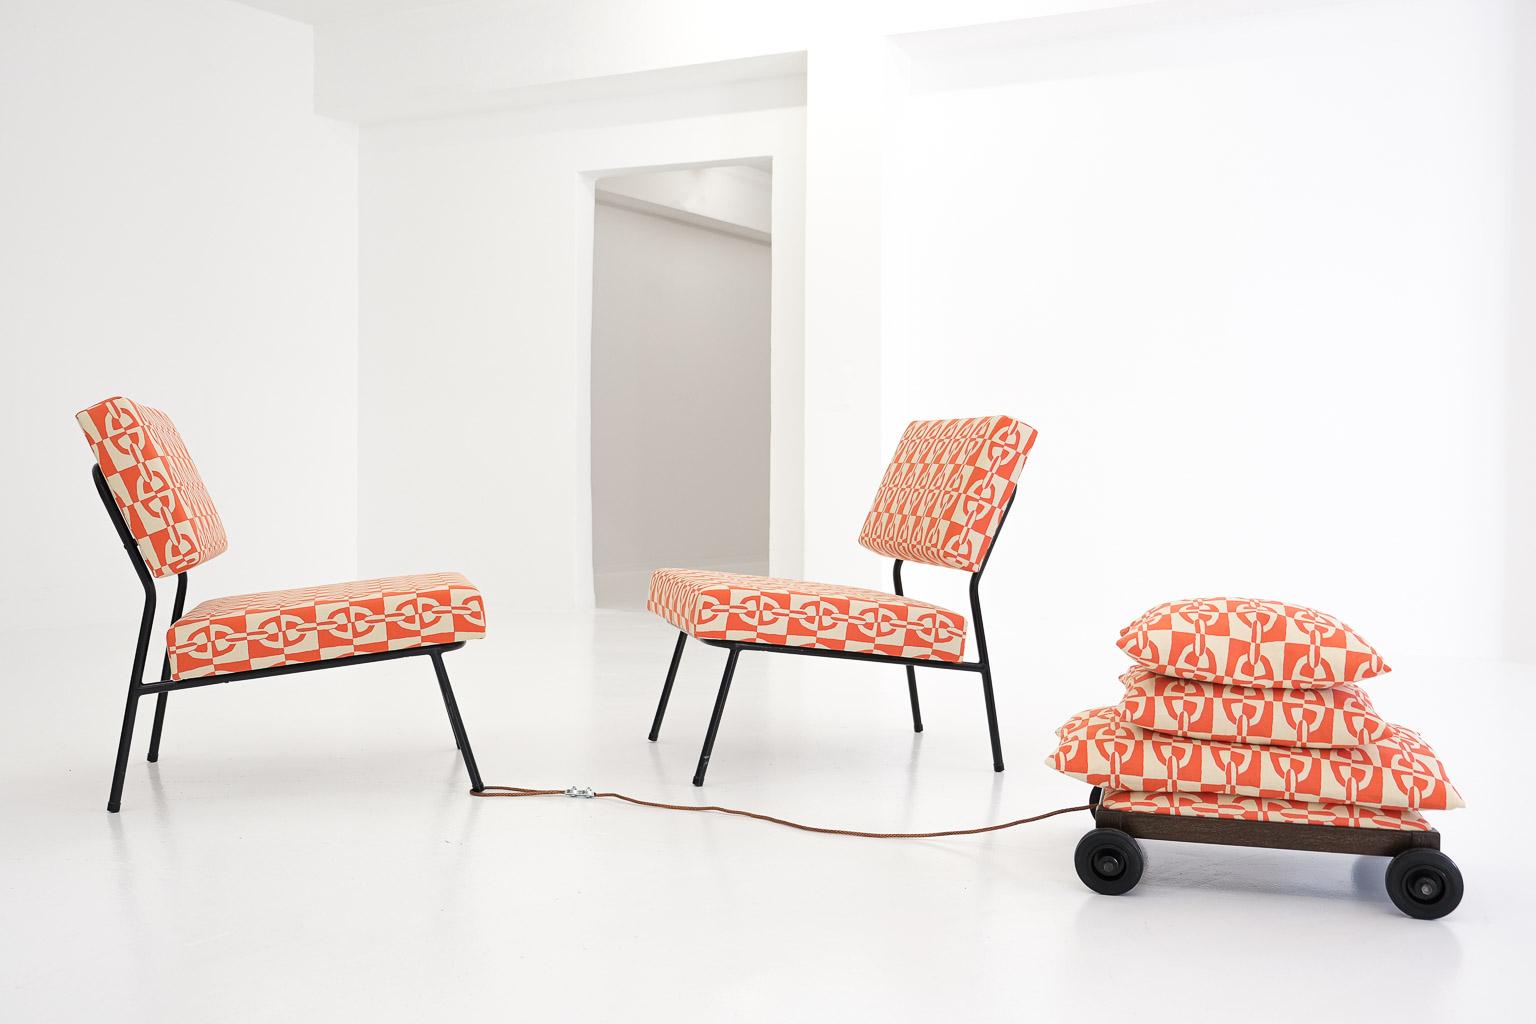 French Pair of Easy Chairs by Paul Geoffroy for Airborne, with Hermès Fabrics, 1950s For Sale